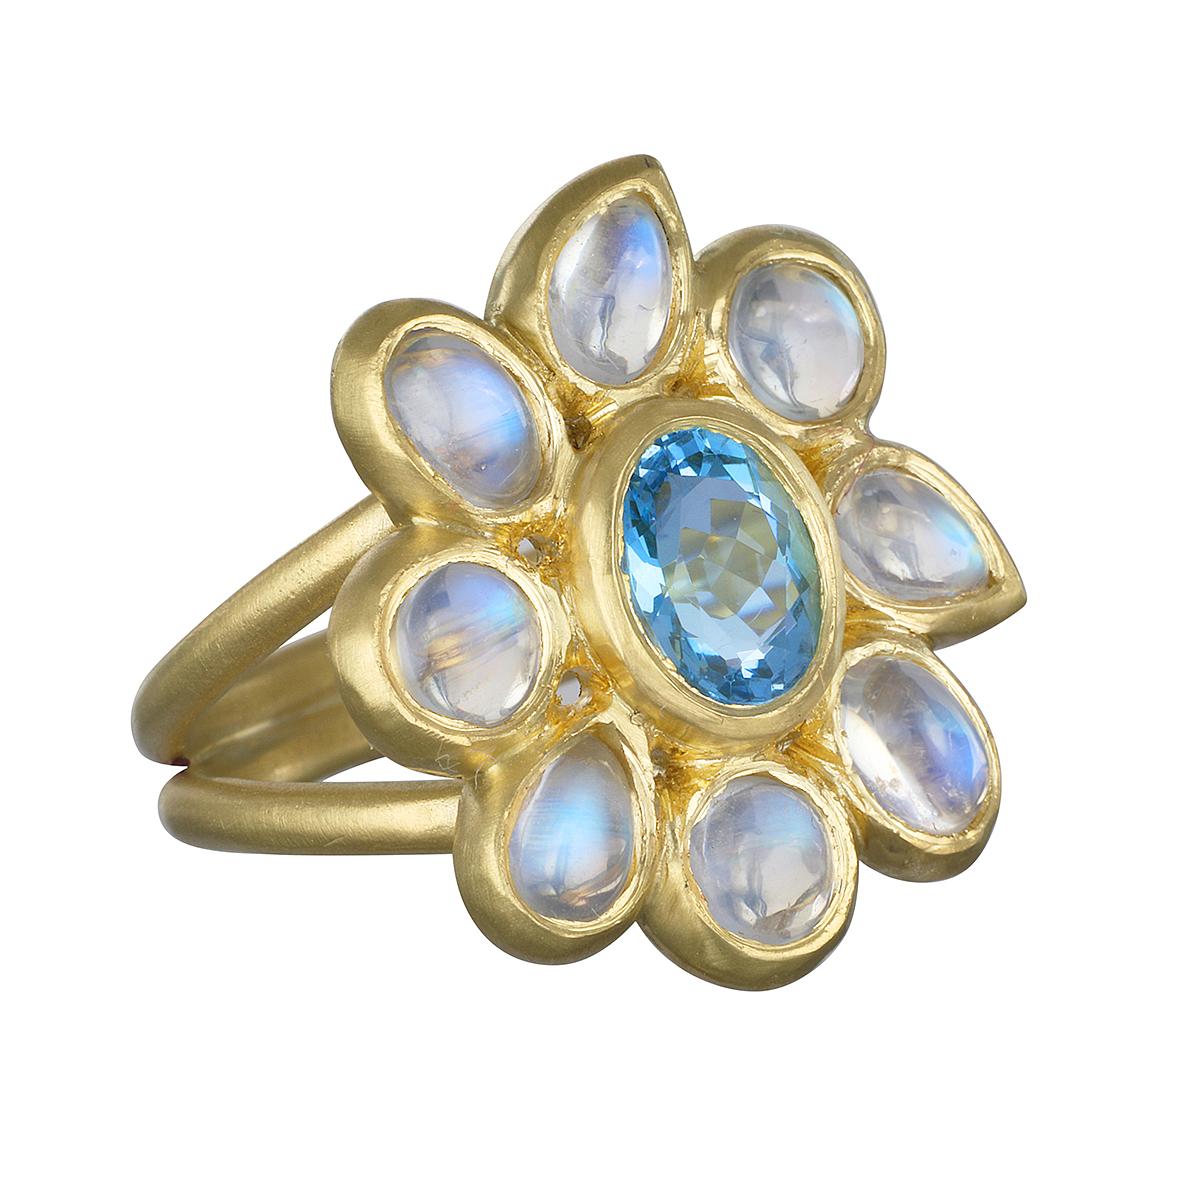 One of a Kind and Unique, Faye Kim's Ceylon Blue Moonstone Daisy Ring features a beautiful blue Aquamarine center.  Known for its beautiful adularescence, the blue flash adds to the overall mystique surrounding moonstones. 

Model is photographed